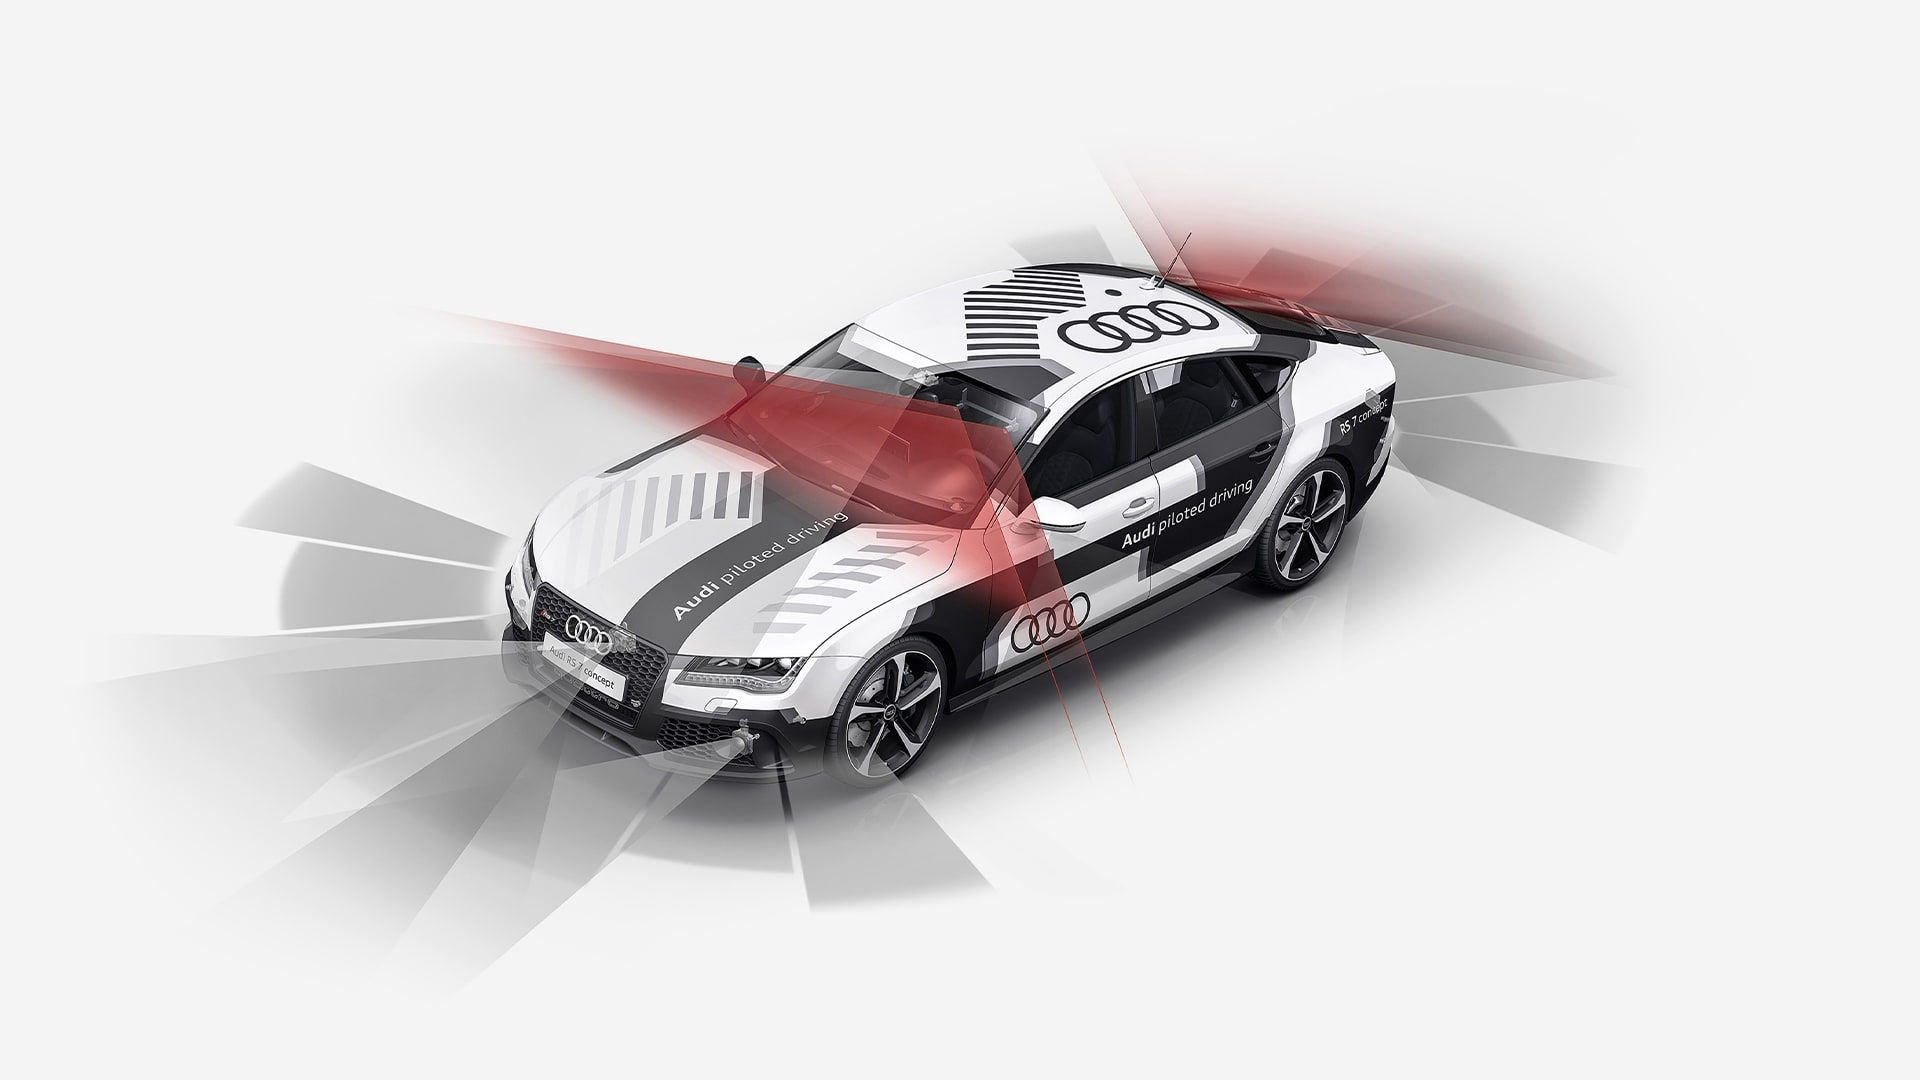 Audi RS 7 piloted driving concept 3-D camera system